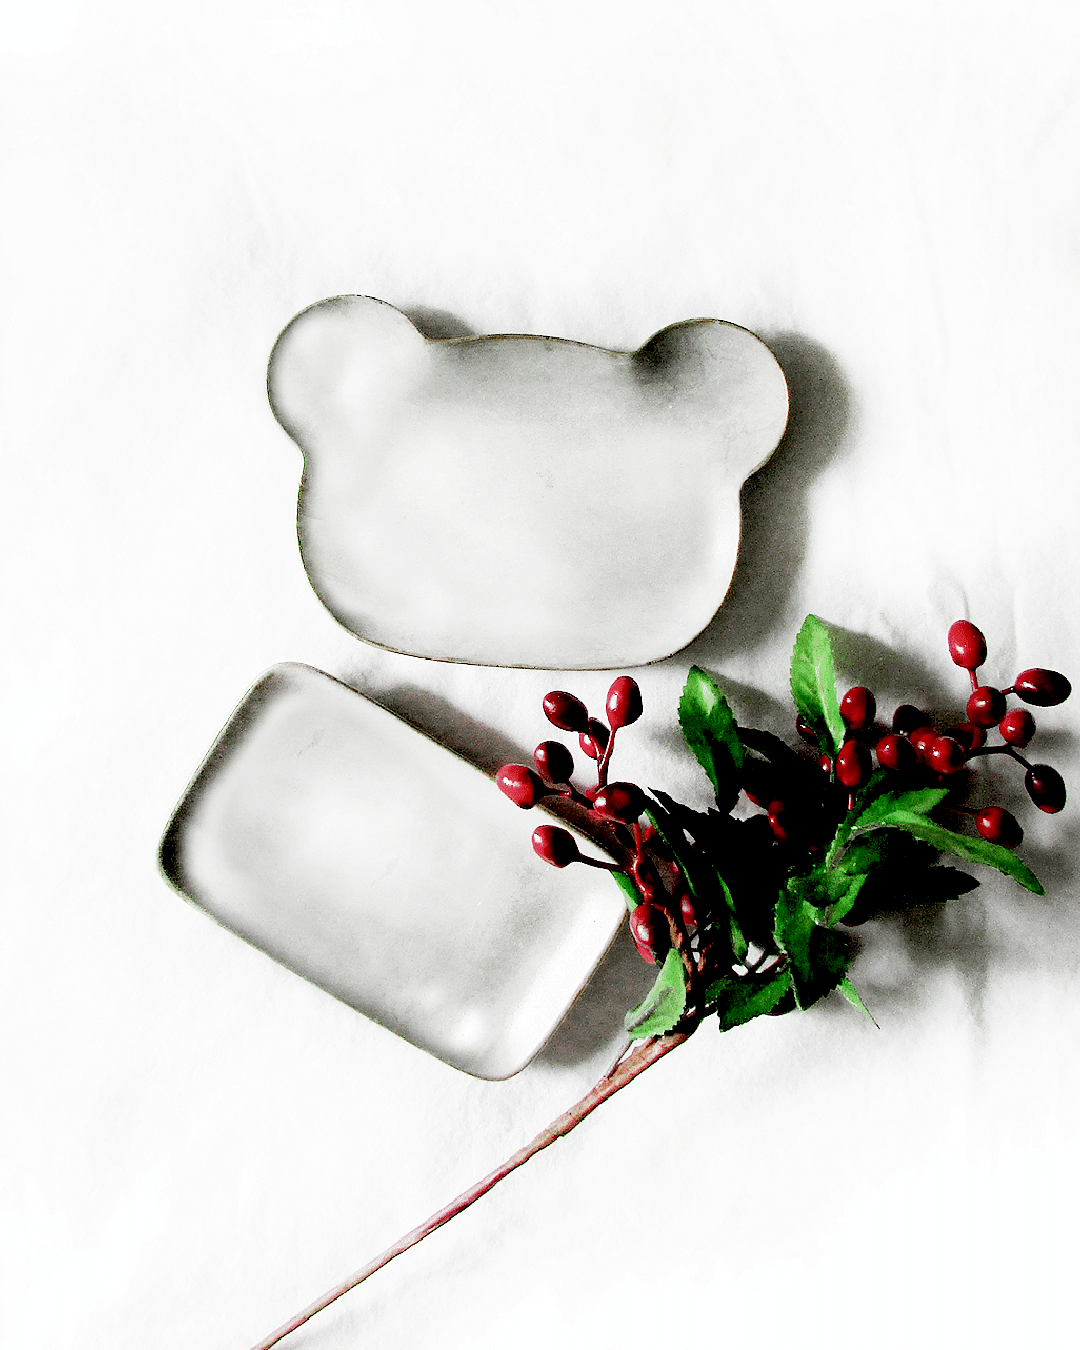 Handmade Little Rustic Minimalist Concrete Tray Jewelry Tray Candle Holder Home Decoration Concrete Tray A Moment Of Now Women’s Boutique Clothing Online Lifestyle Store